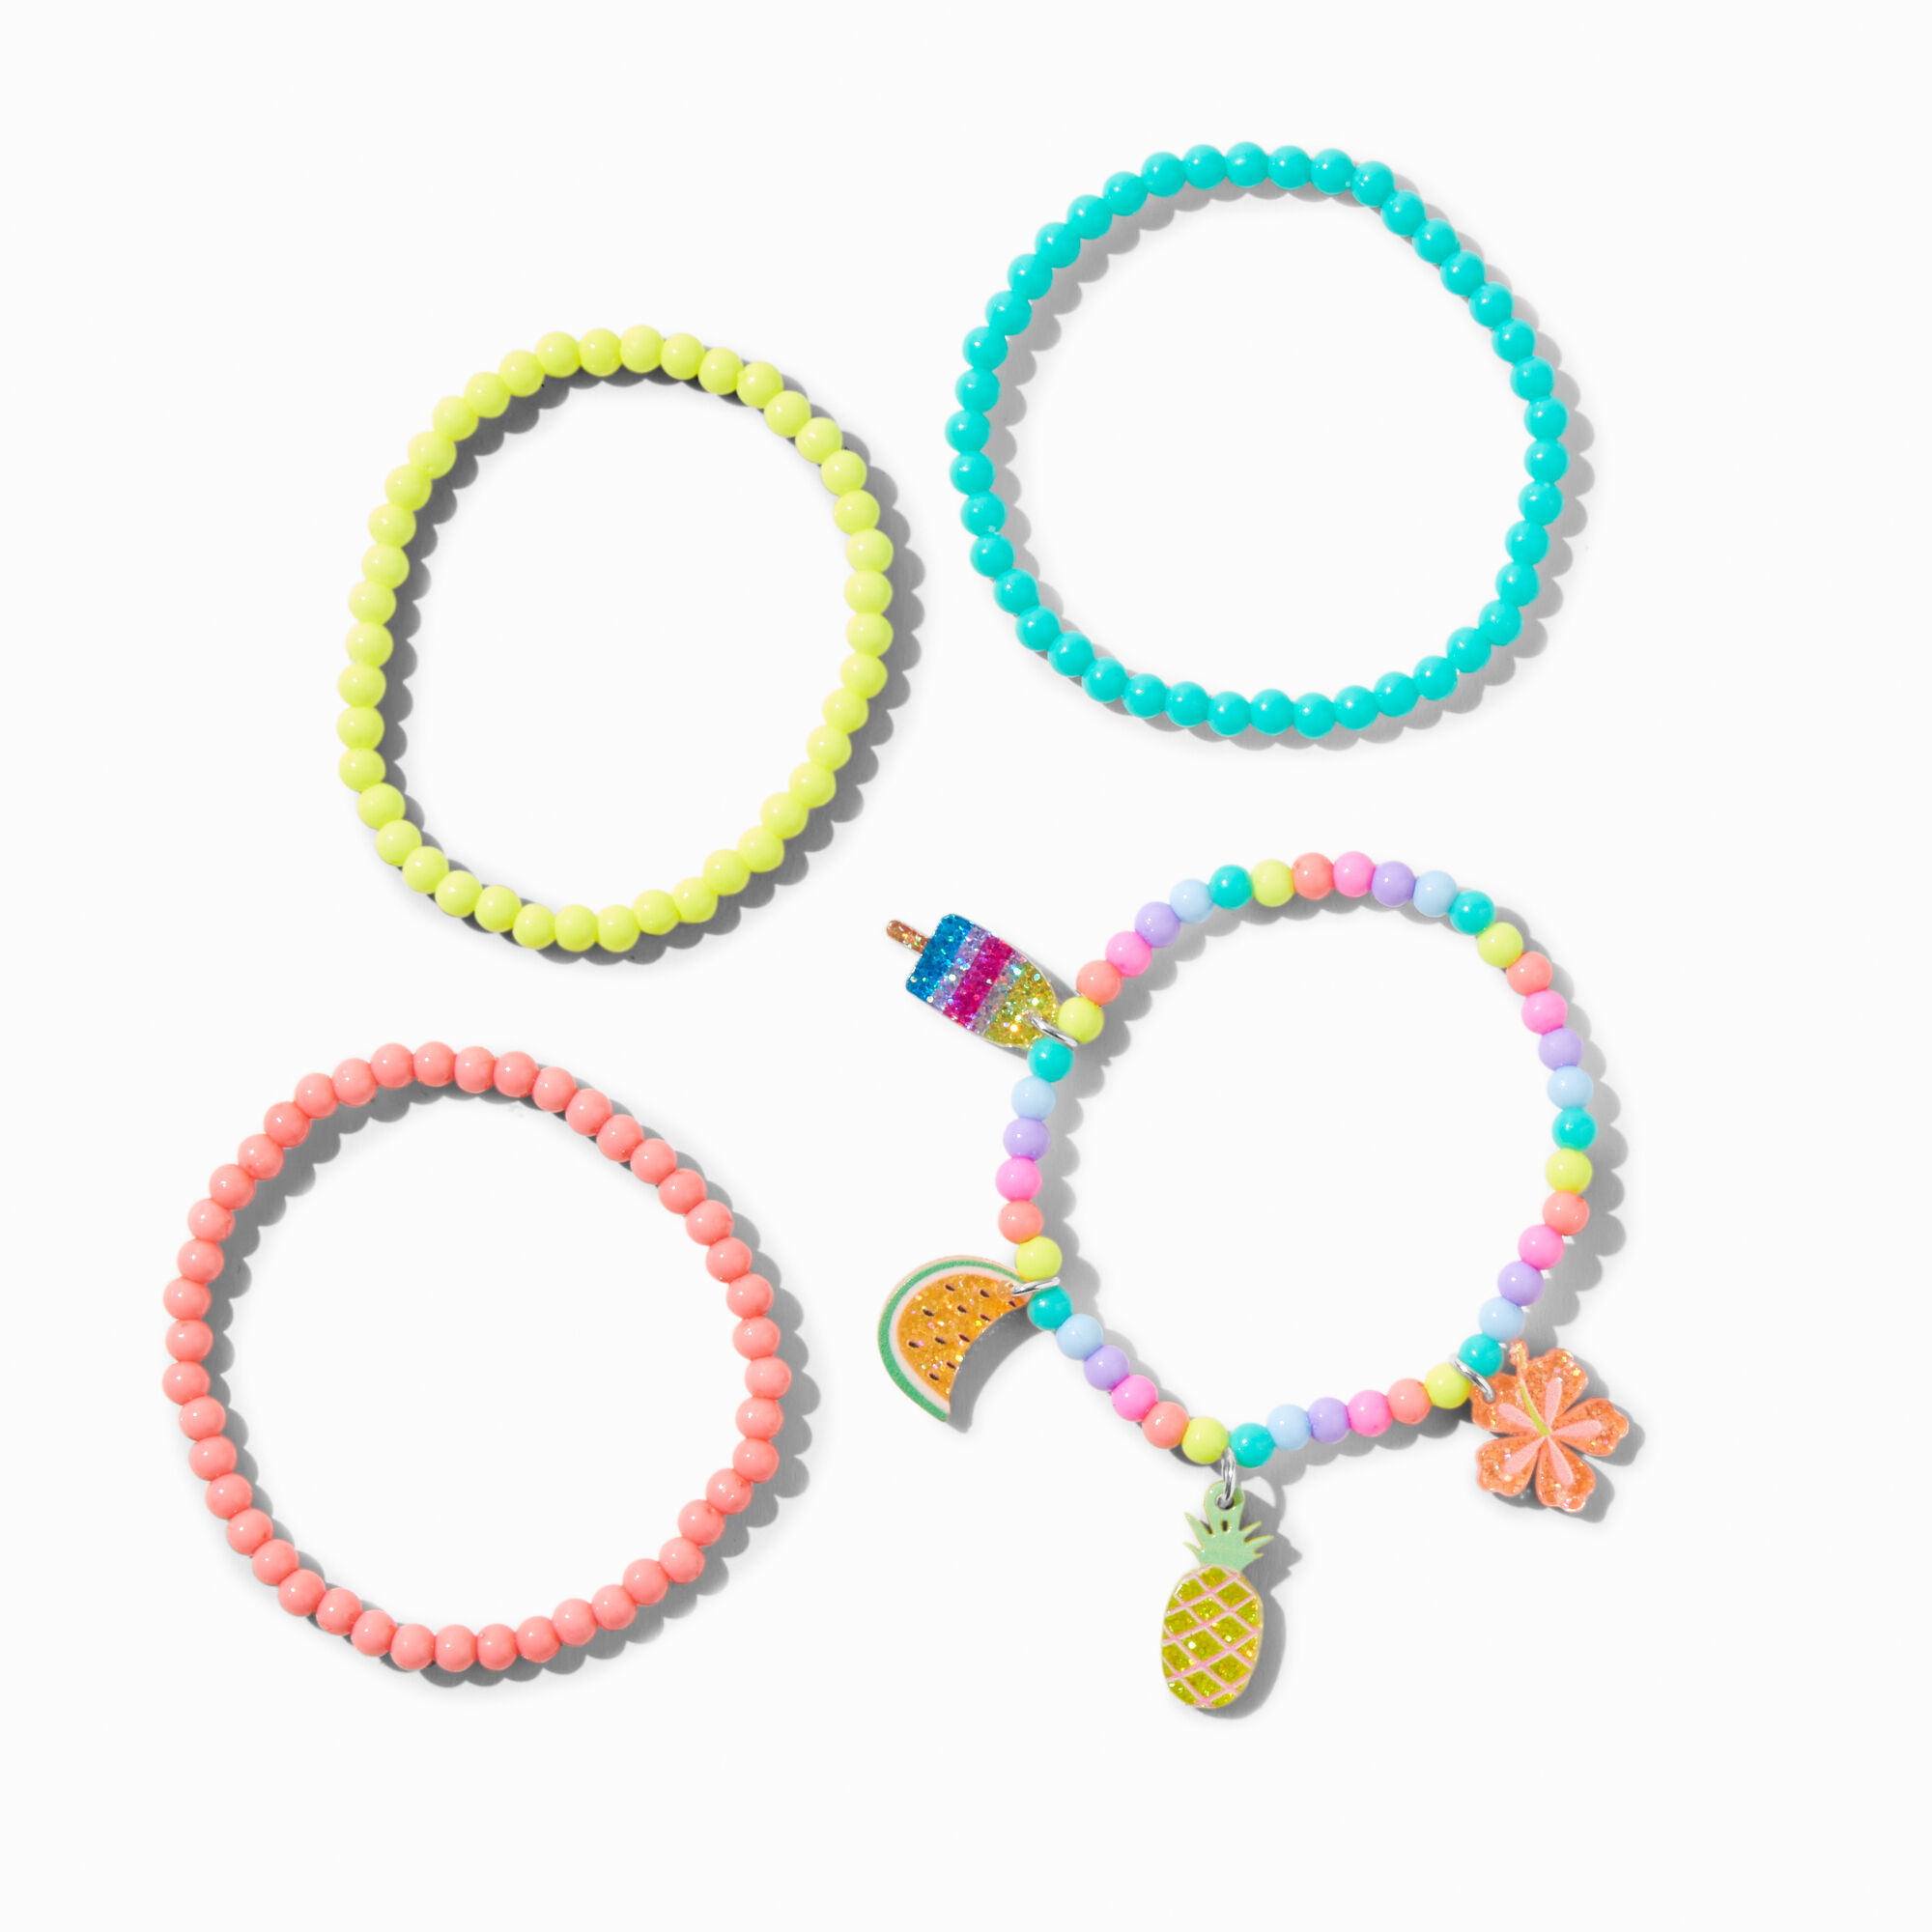 View Claires Club Summer Seed Bead Stretch Bracelets 4 Pack information